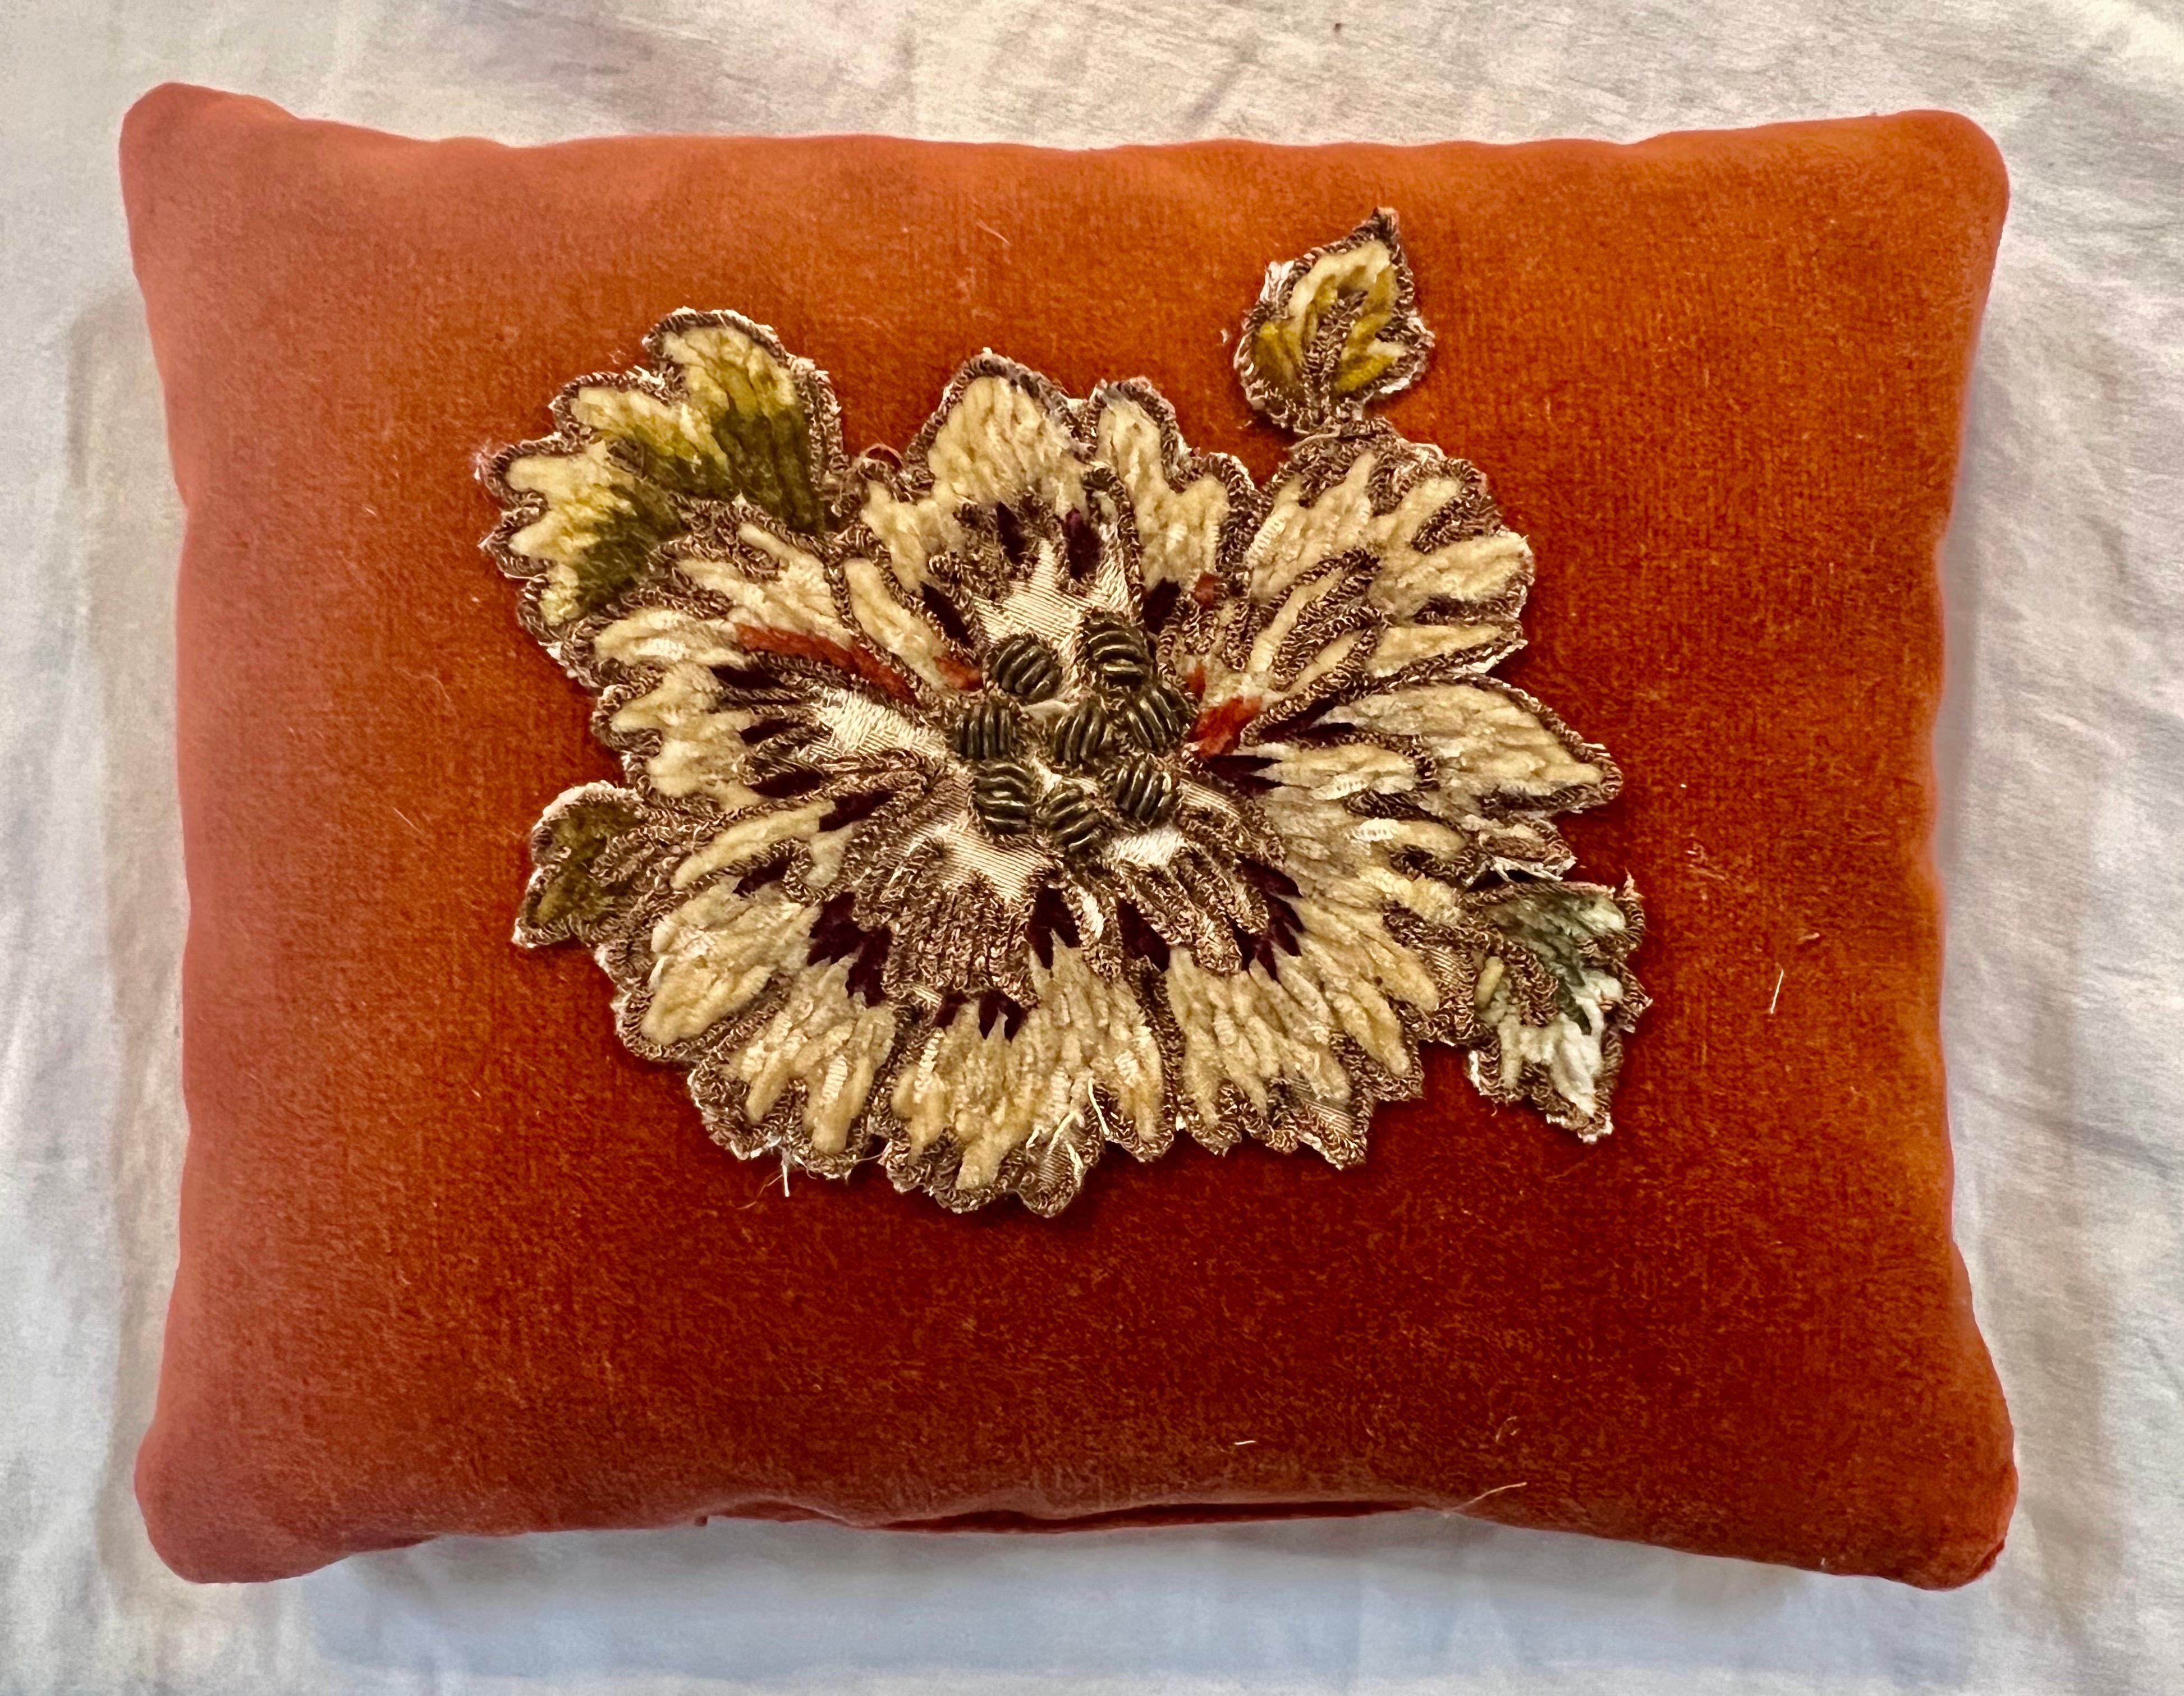 A beautifully crafted lavender sachet with intricate details.  The burnt orange velvet paired with a 19th-century French metallic & chenille flower creates a unique and elegant piece.